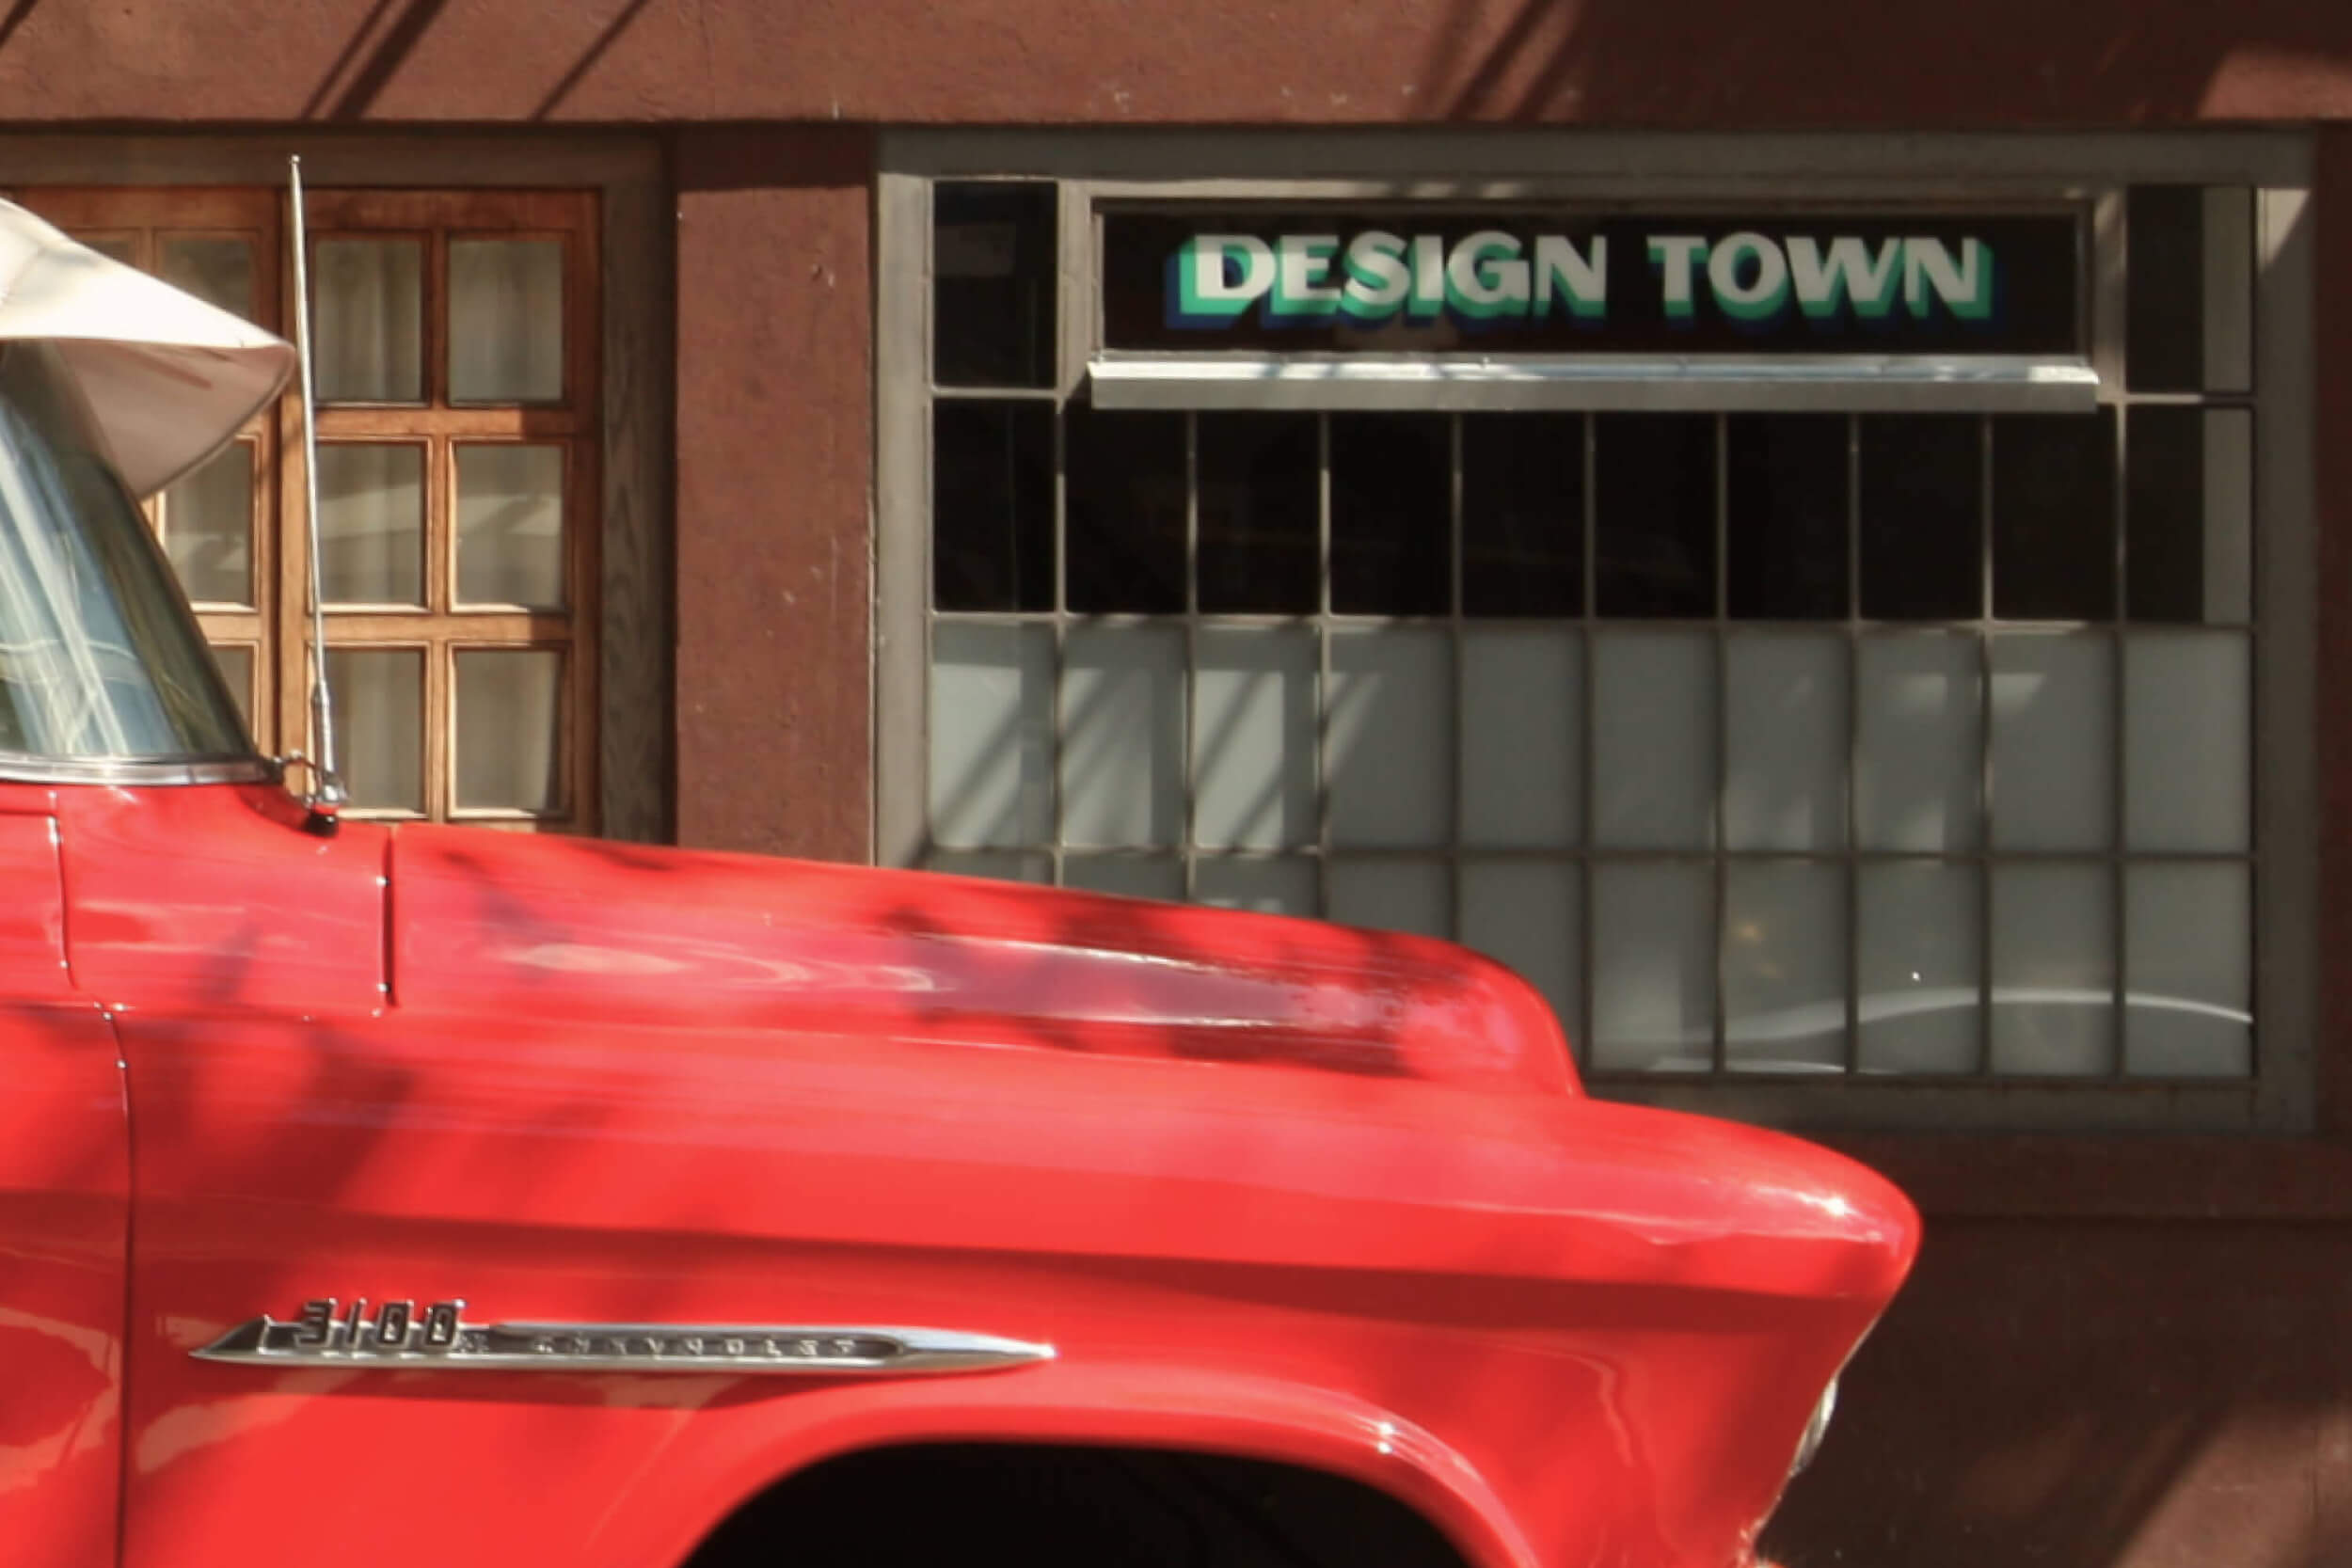 The storefront of Design Town with an old red pickup truck in the foreground